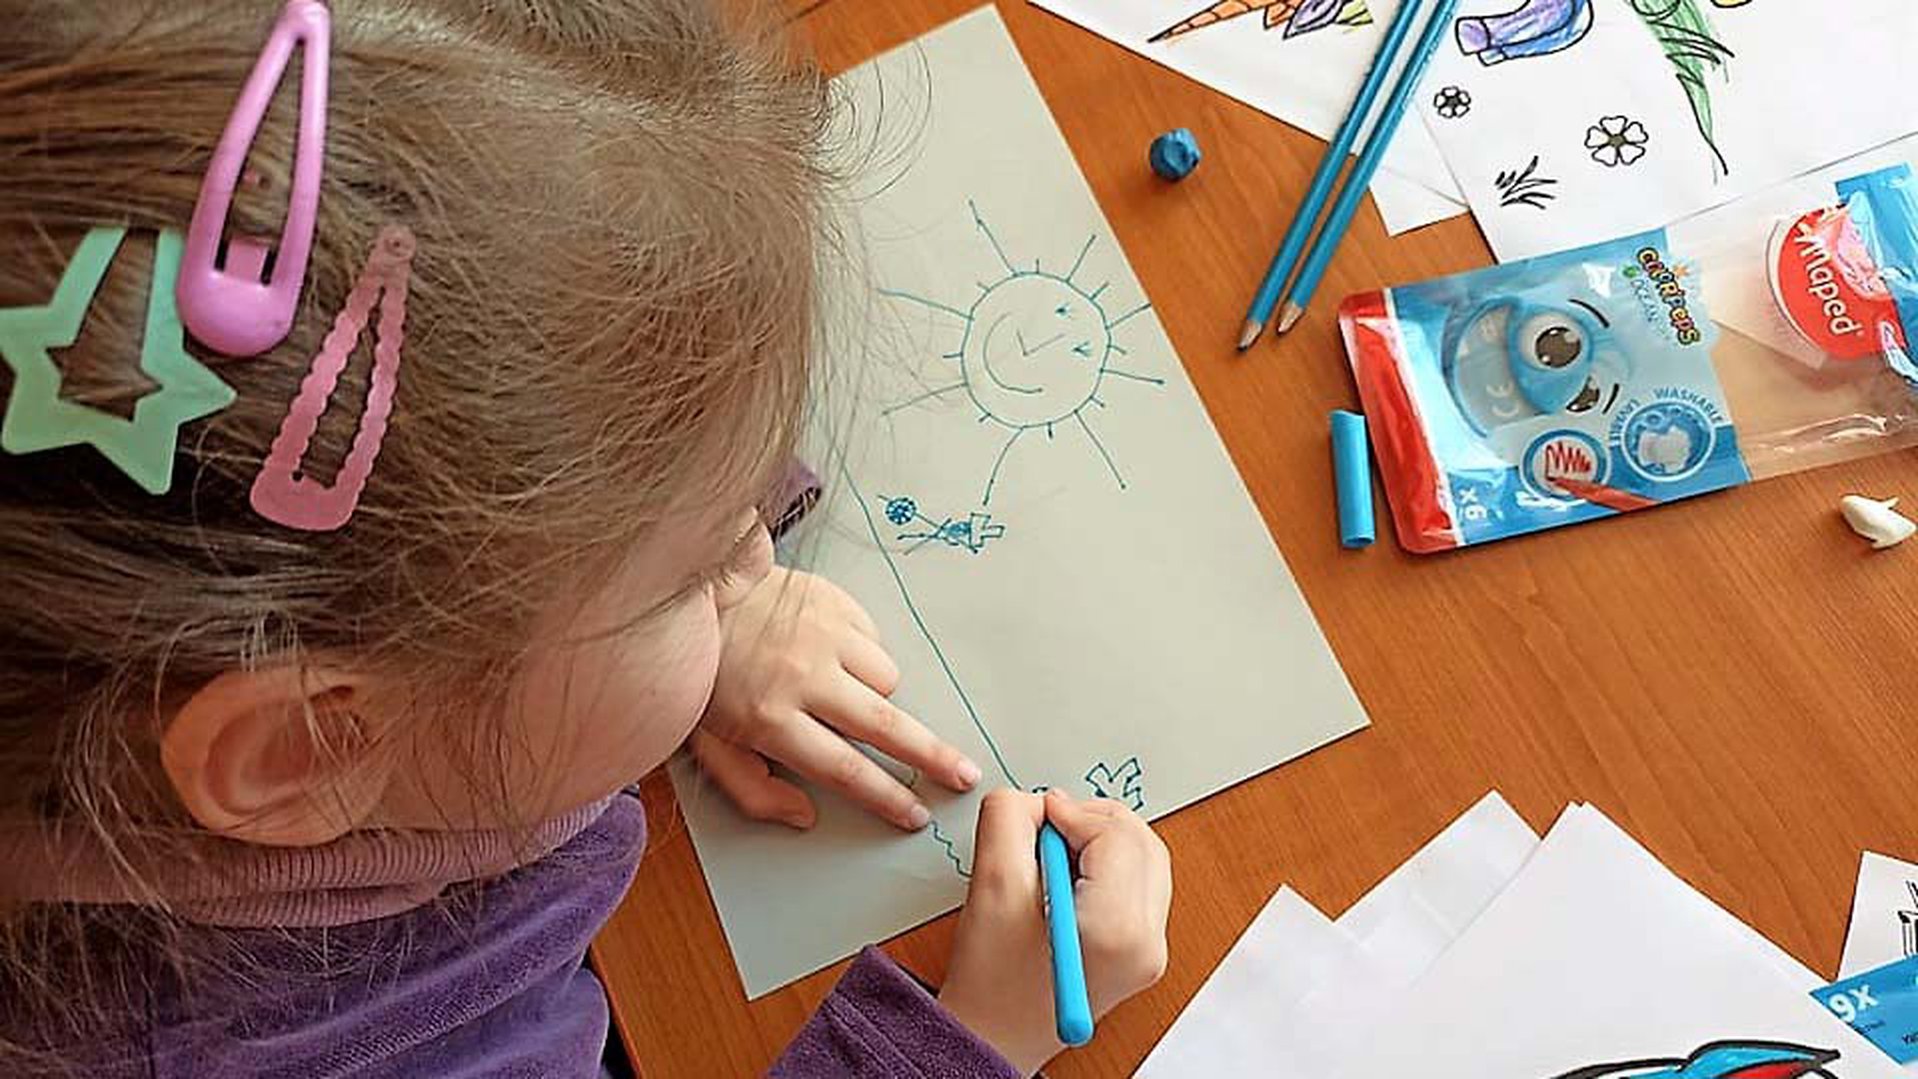 A young girl draws a sun. Children who fled Ukraine are drawing as part of psychological first aid.